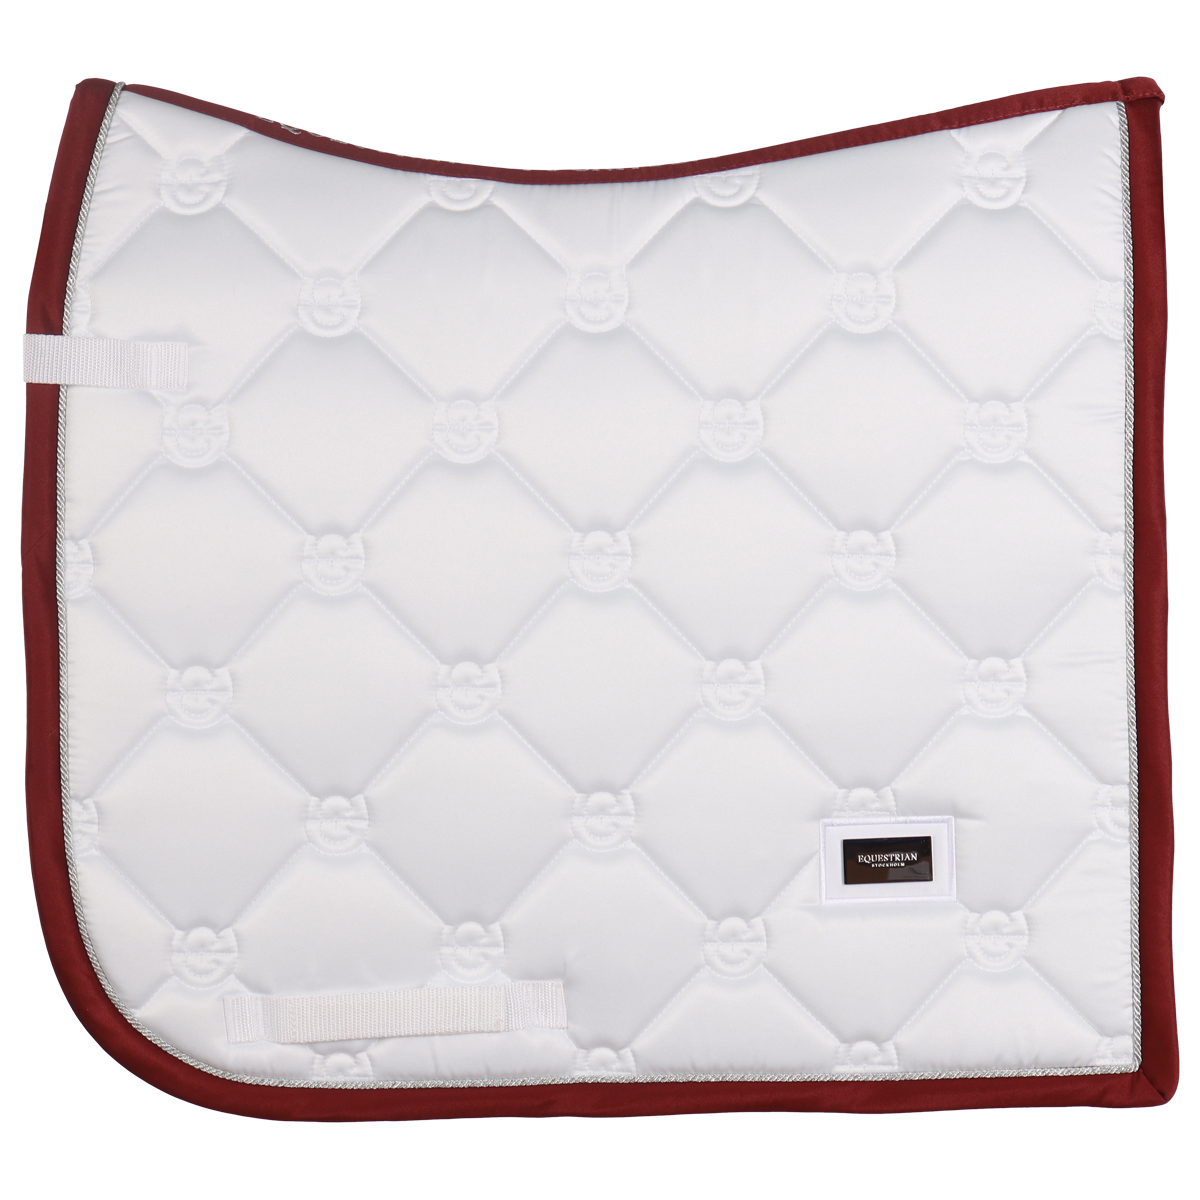 https://www.epplejeck.com/img/saddle-pad-equestrian-stockholm-perfection-white-bordeaux-white-red_1500x1500_129807.jpg